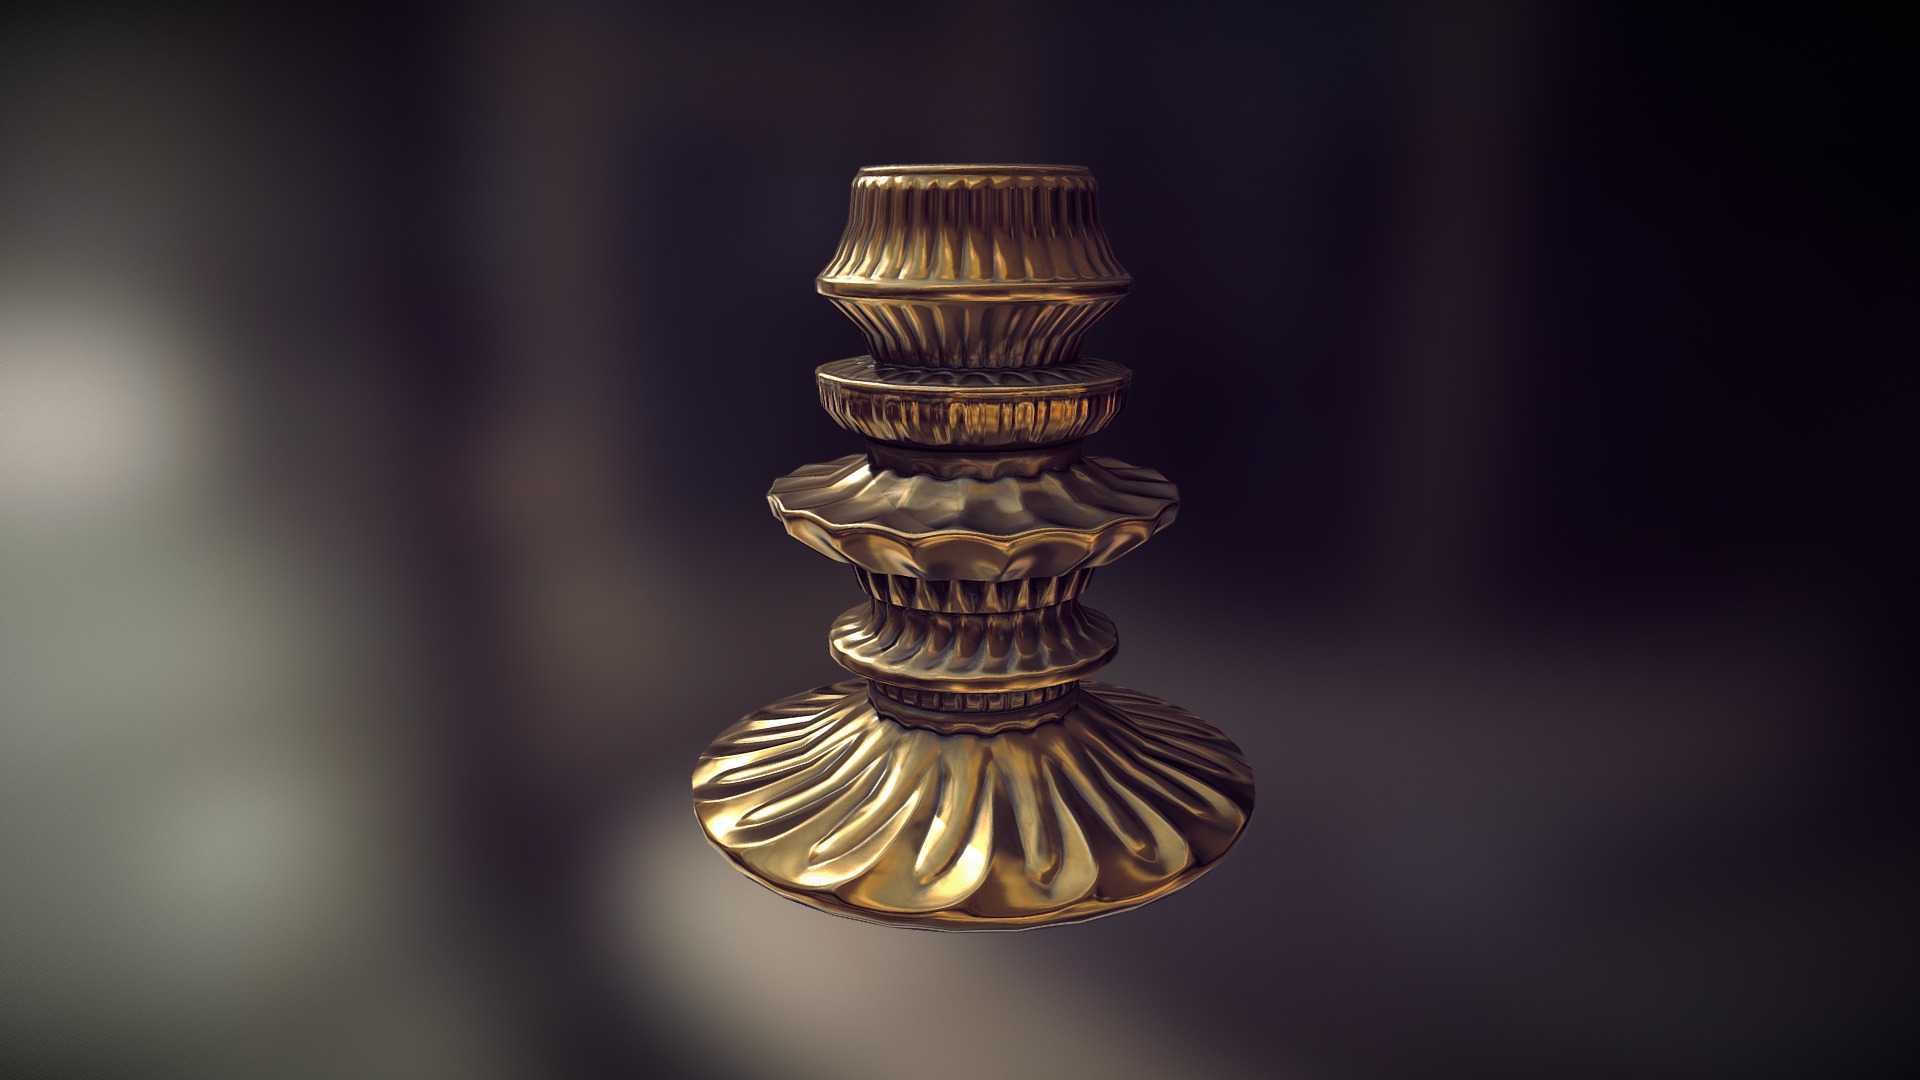 3D model Ornate Antique Candlestick - This is a 3D model of the Ornate Antique Candlestick. The 3D model is about a gold trophy with a black background.